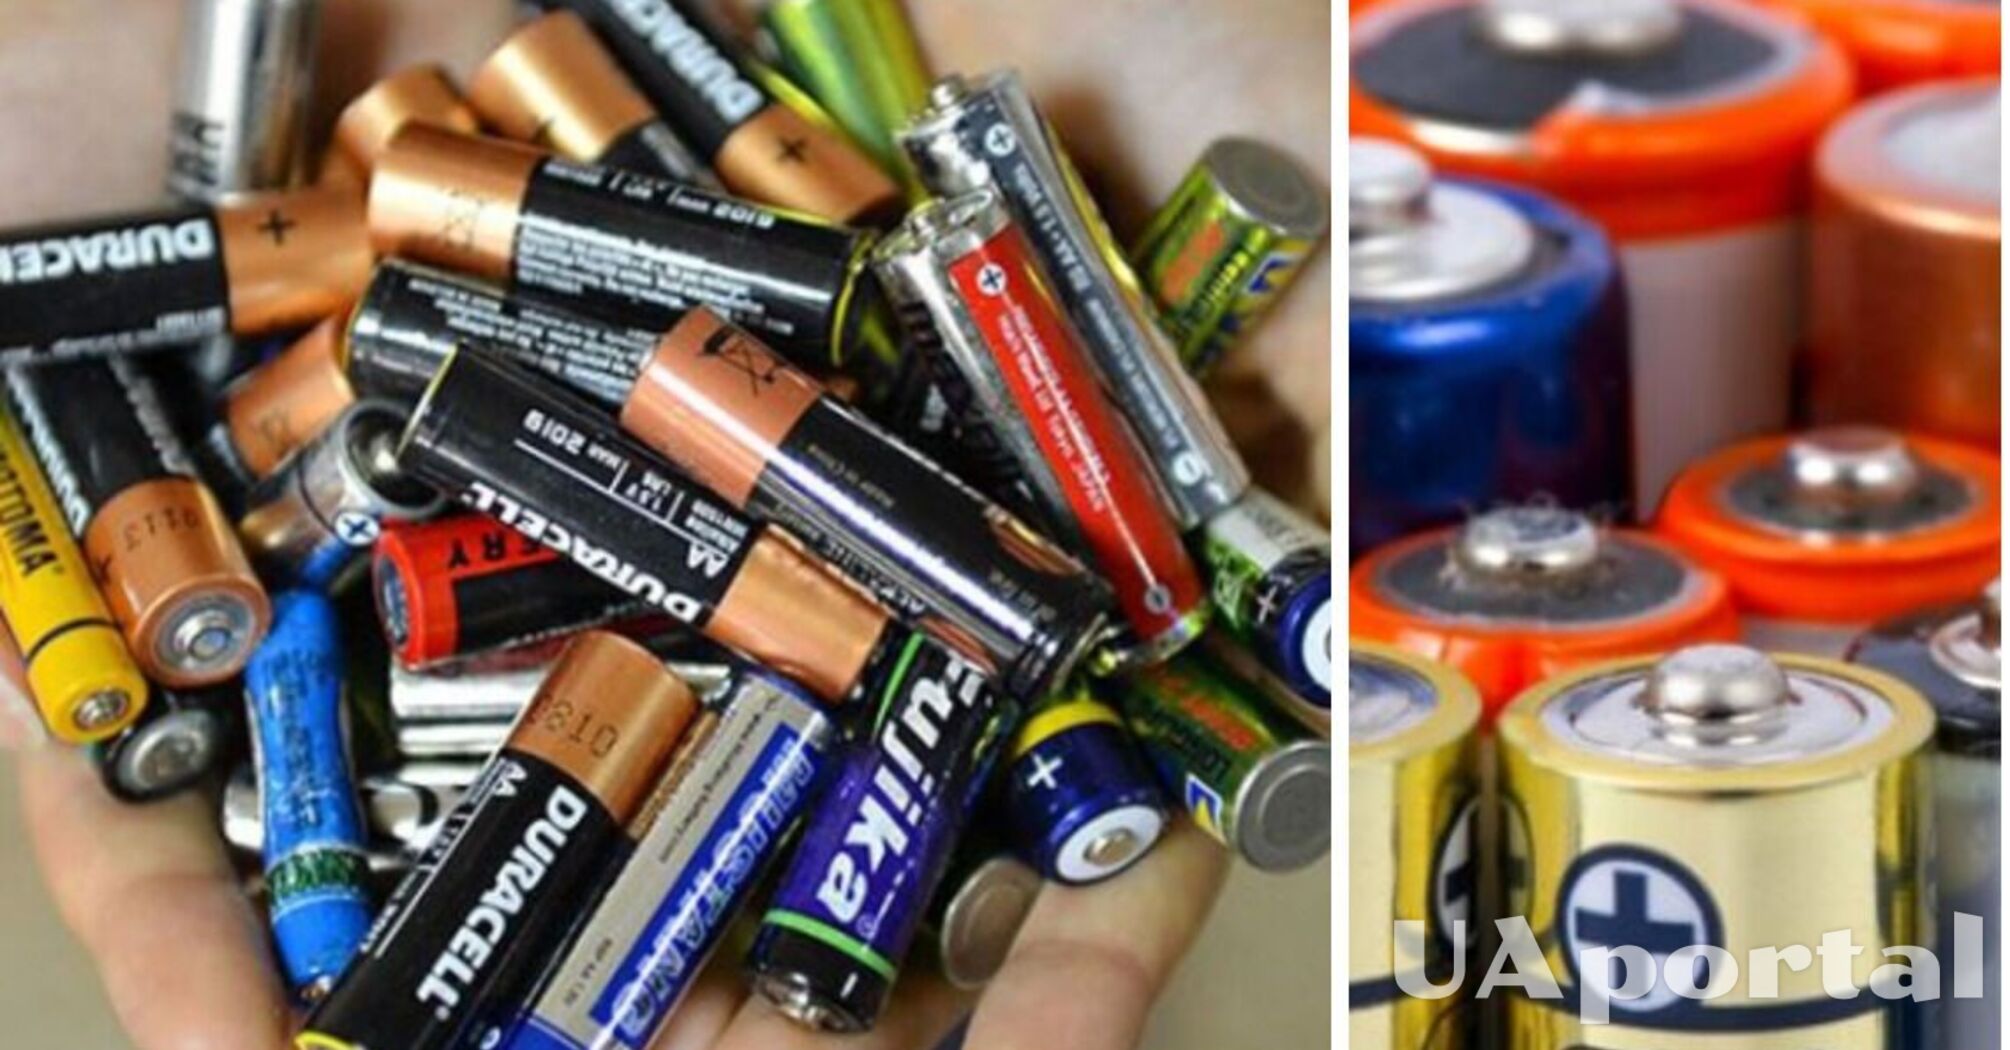 How to use dead batteries: an out-of-the-box lifehack